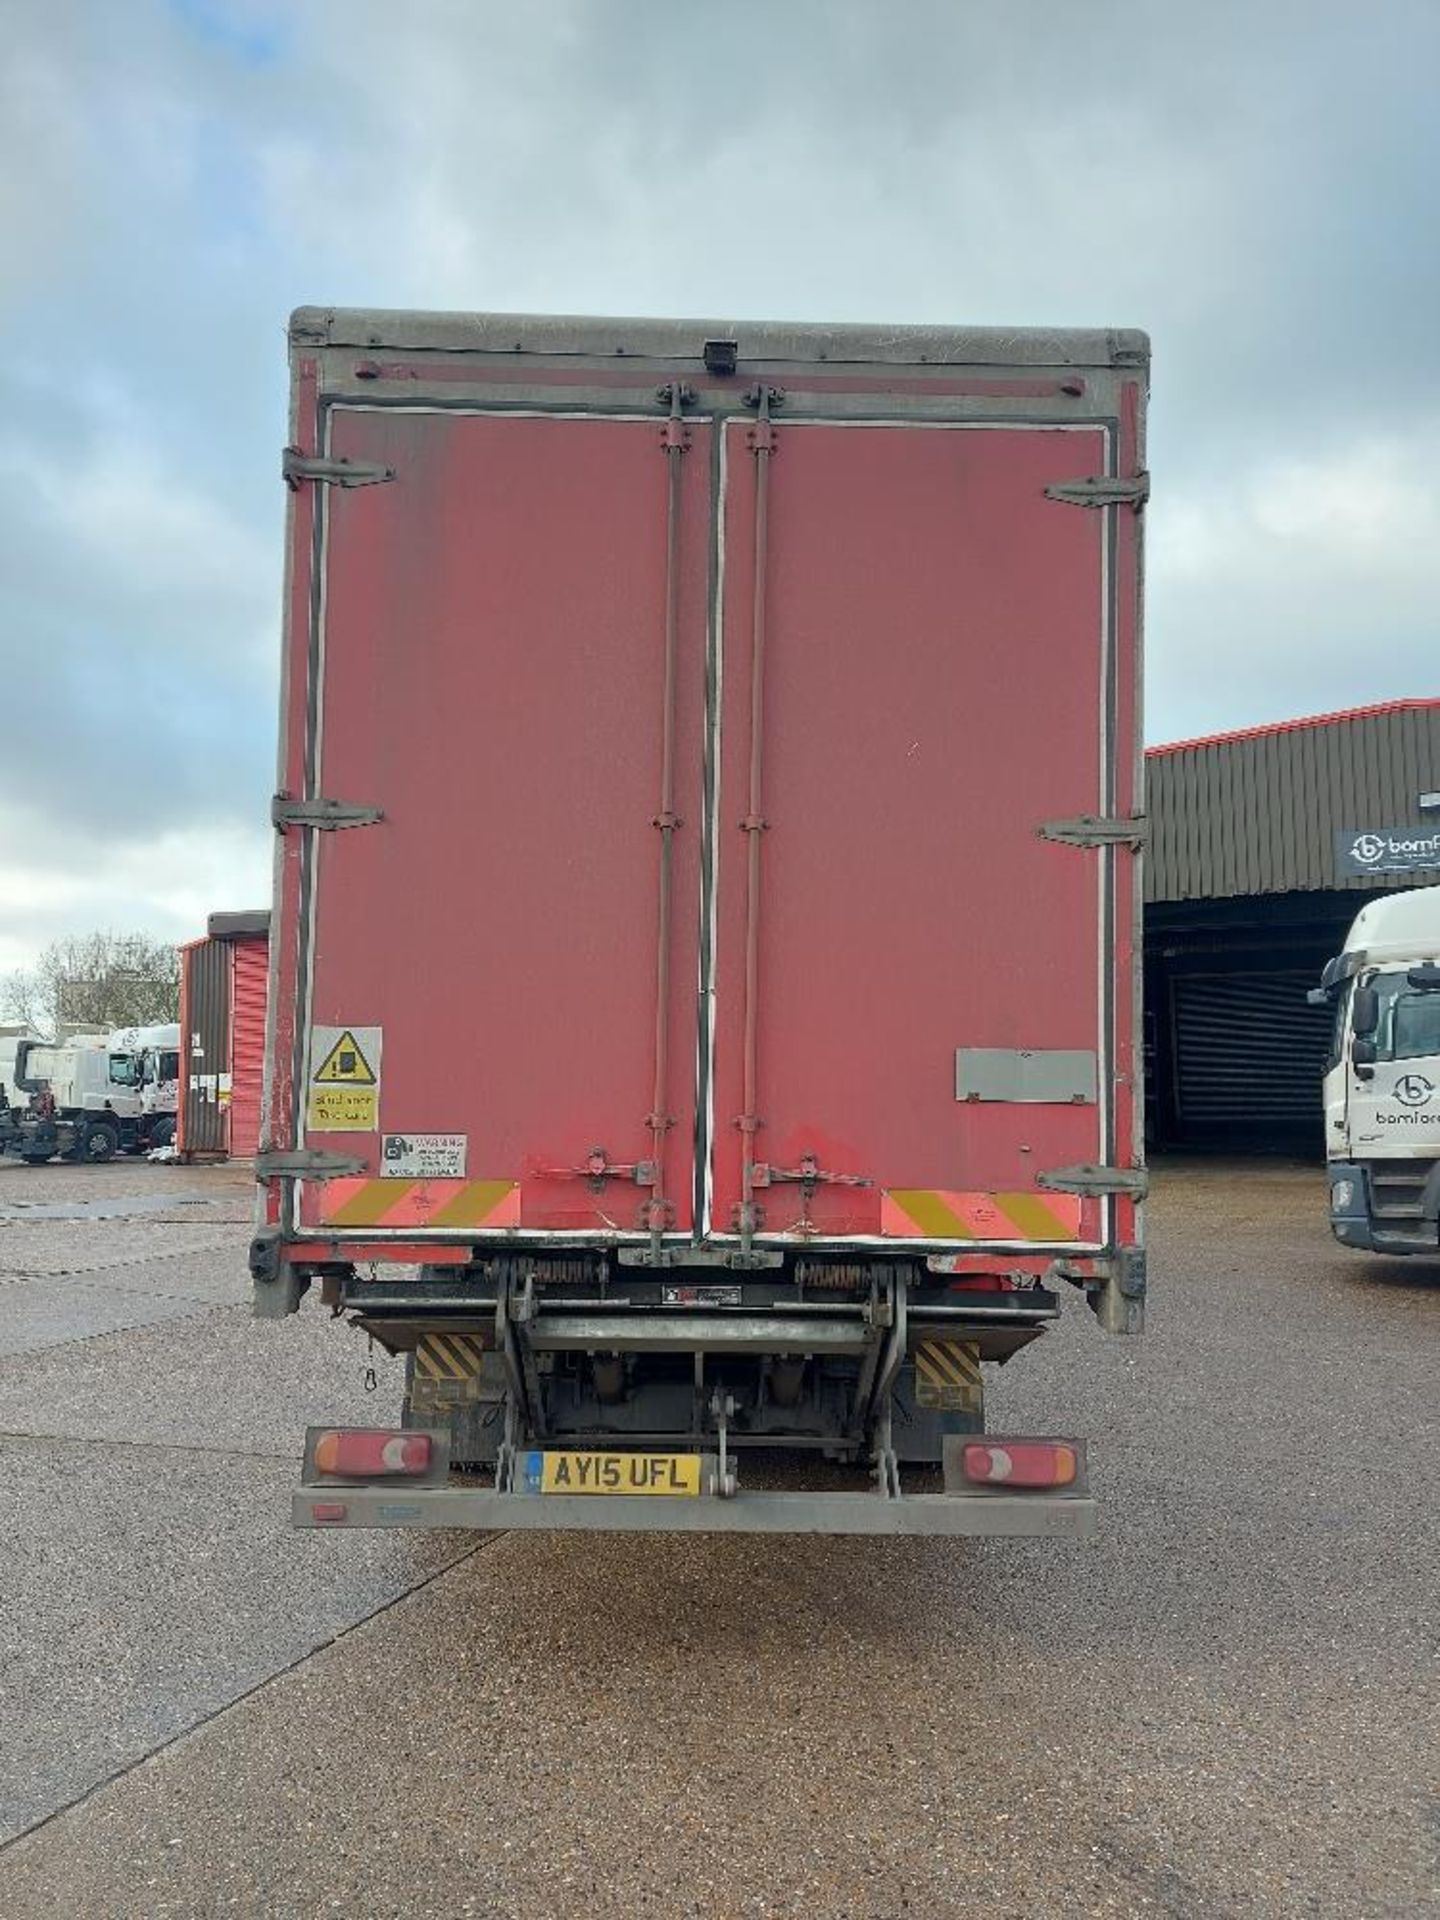 DAF LF 250 4x2 Rigid 18T Curtain Side Lorry with Tail Lift - Image 6 of 11